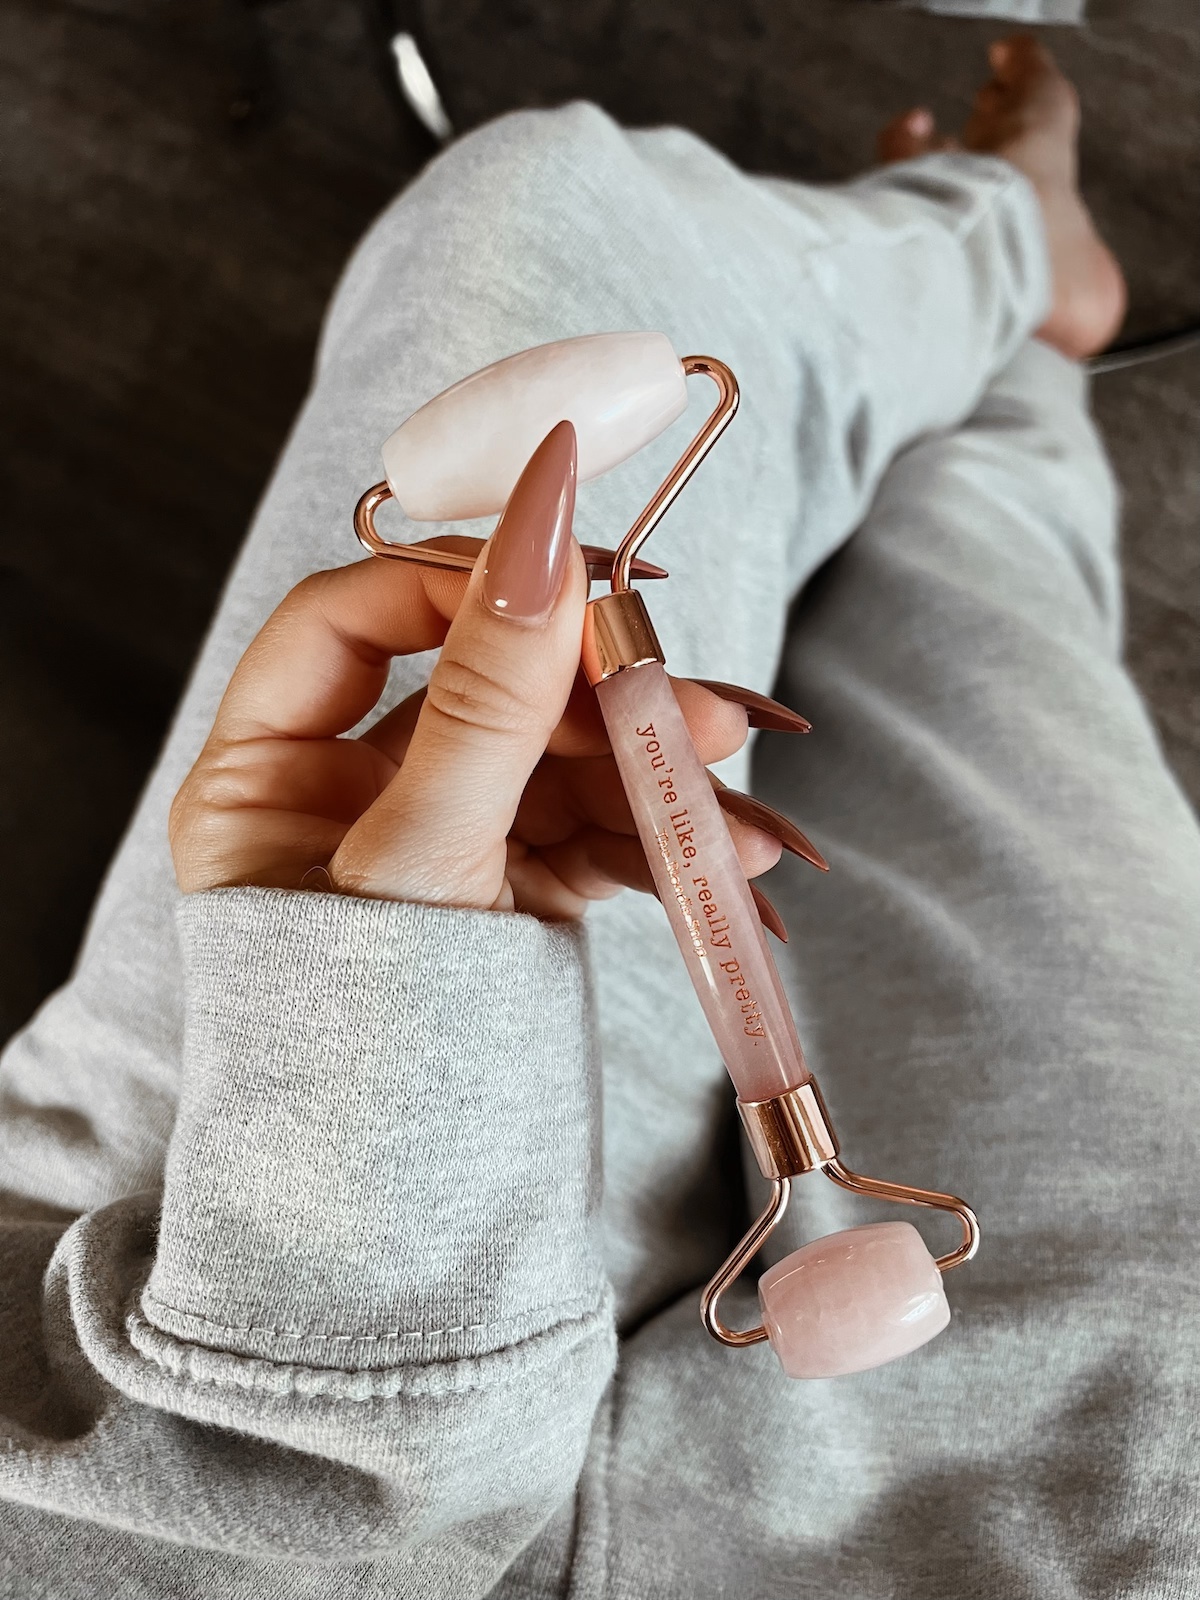 Rose Quartz Roller | You're Like Really Pretty | Hayley Larue | The Blondie Shop